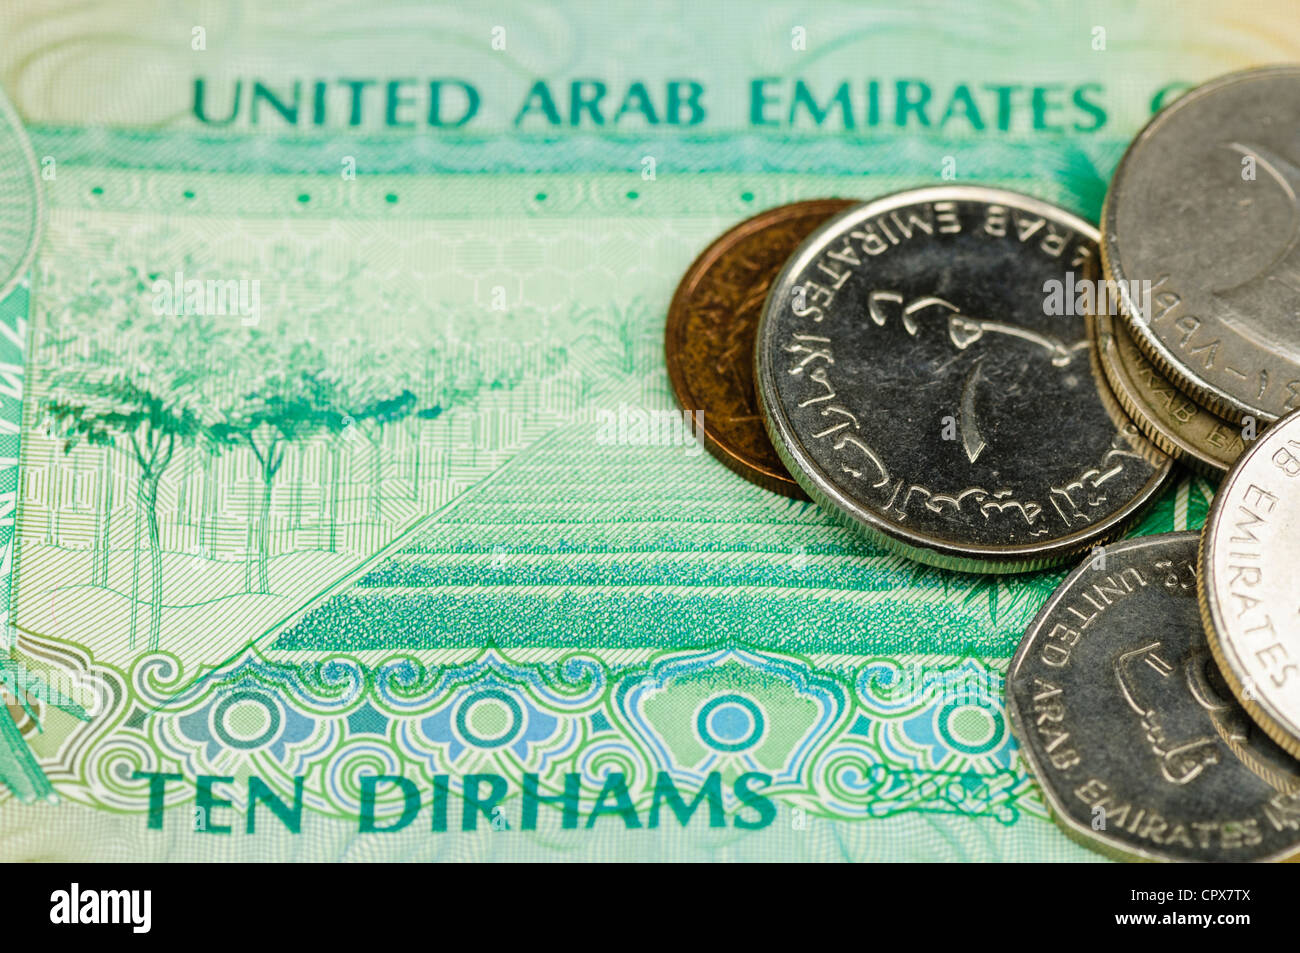 United Arab Emirates UAE dirhams bank note and coins Stock Photo